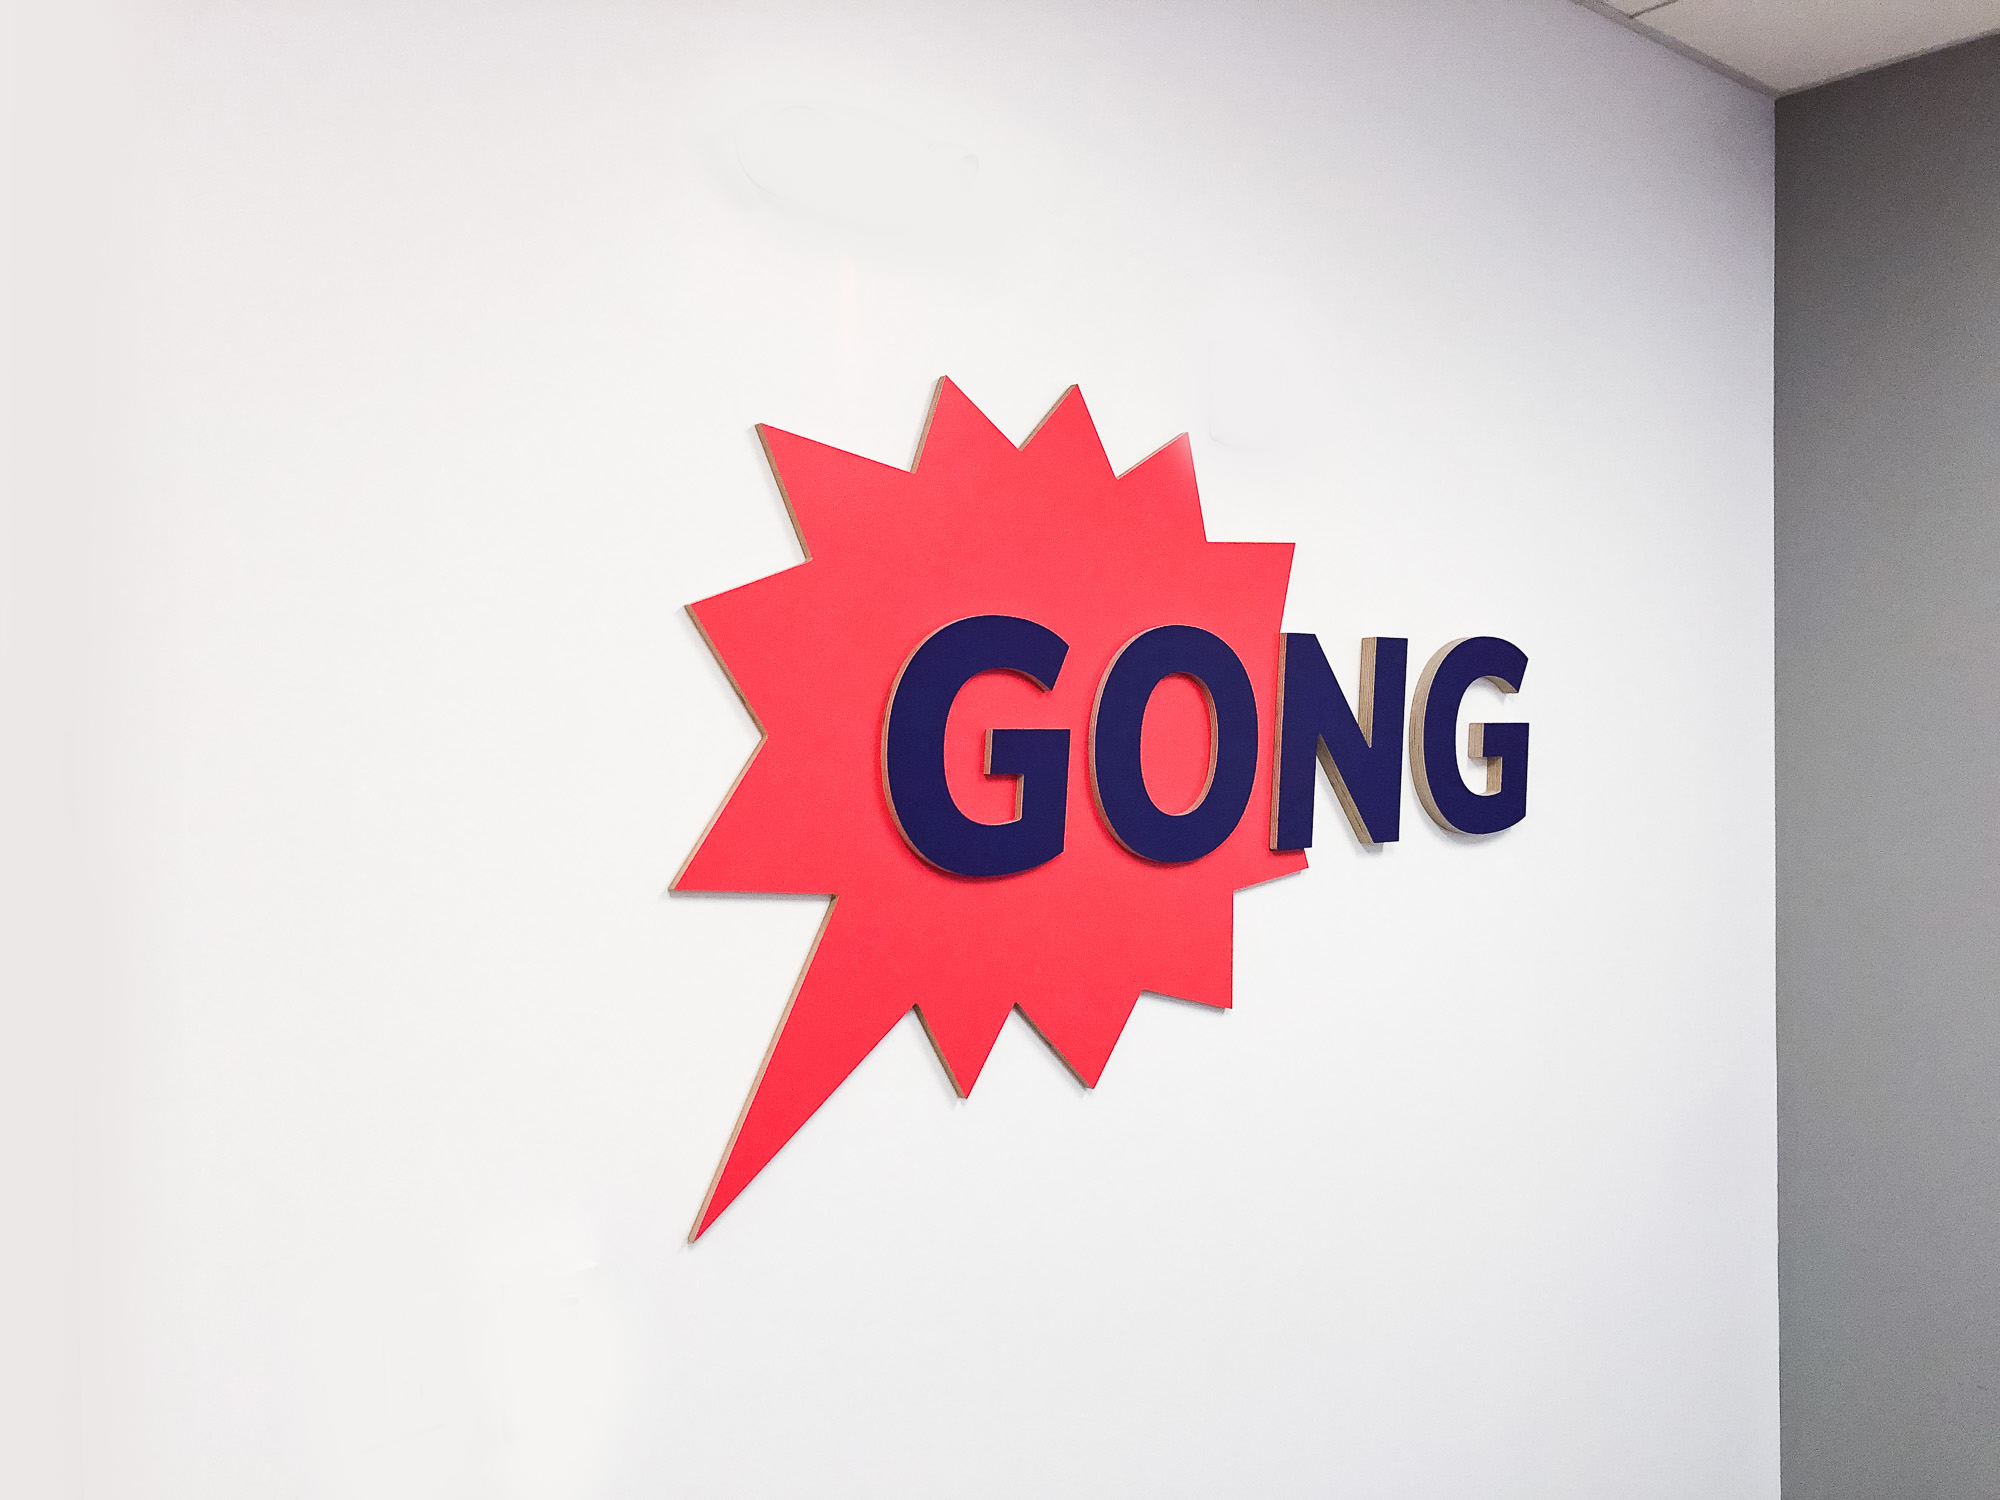 Red and purple painted sign for the San Francisco office of Gong, makers of a conversation intelligence platform for sales.